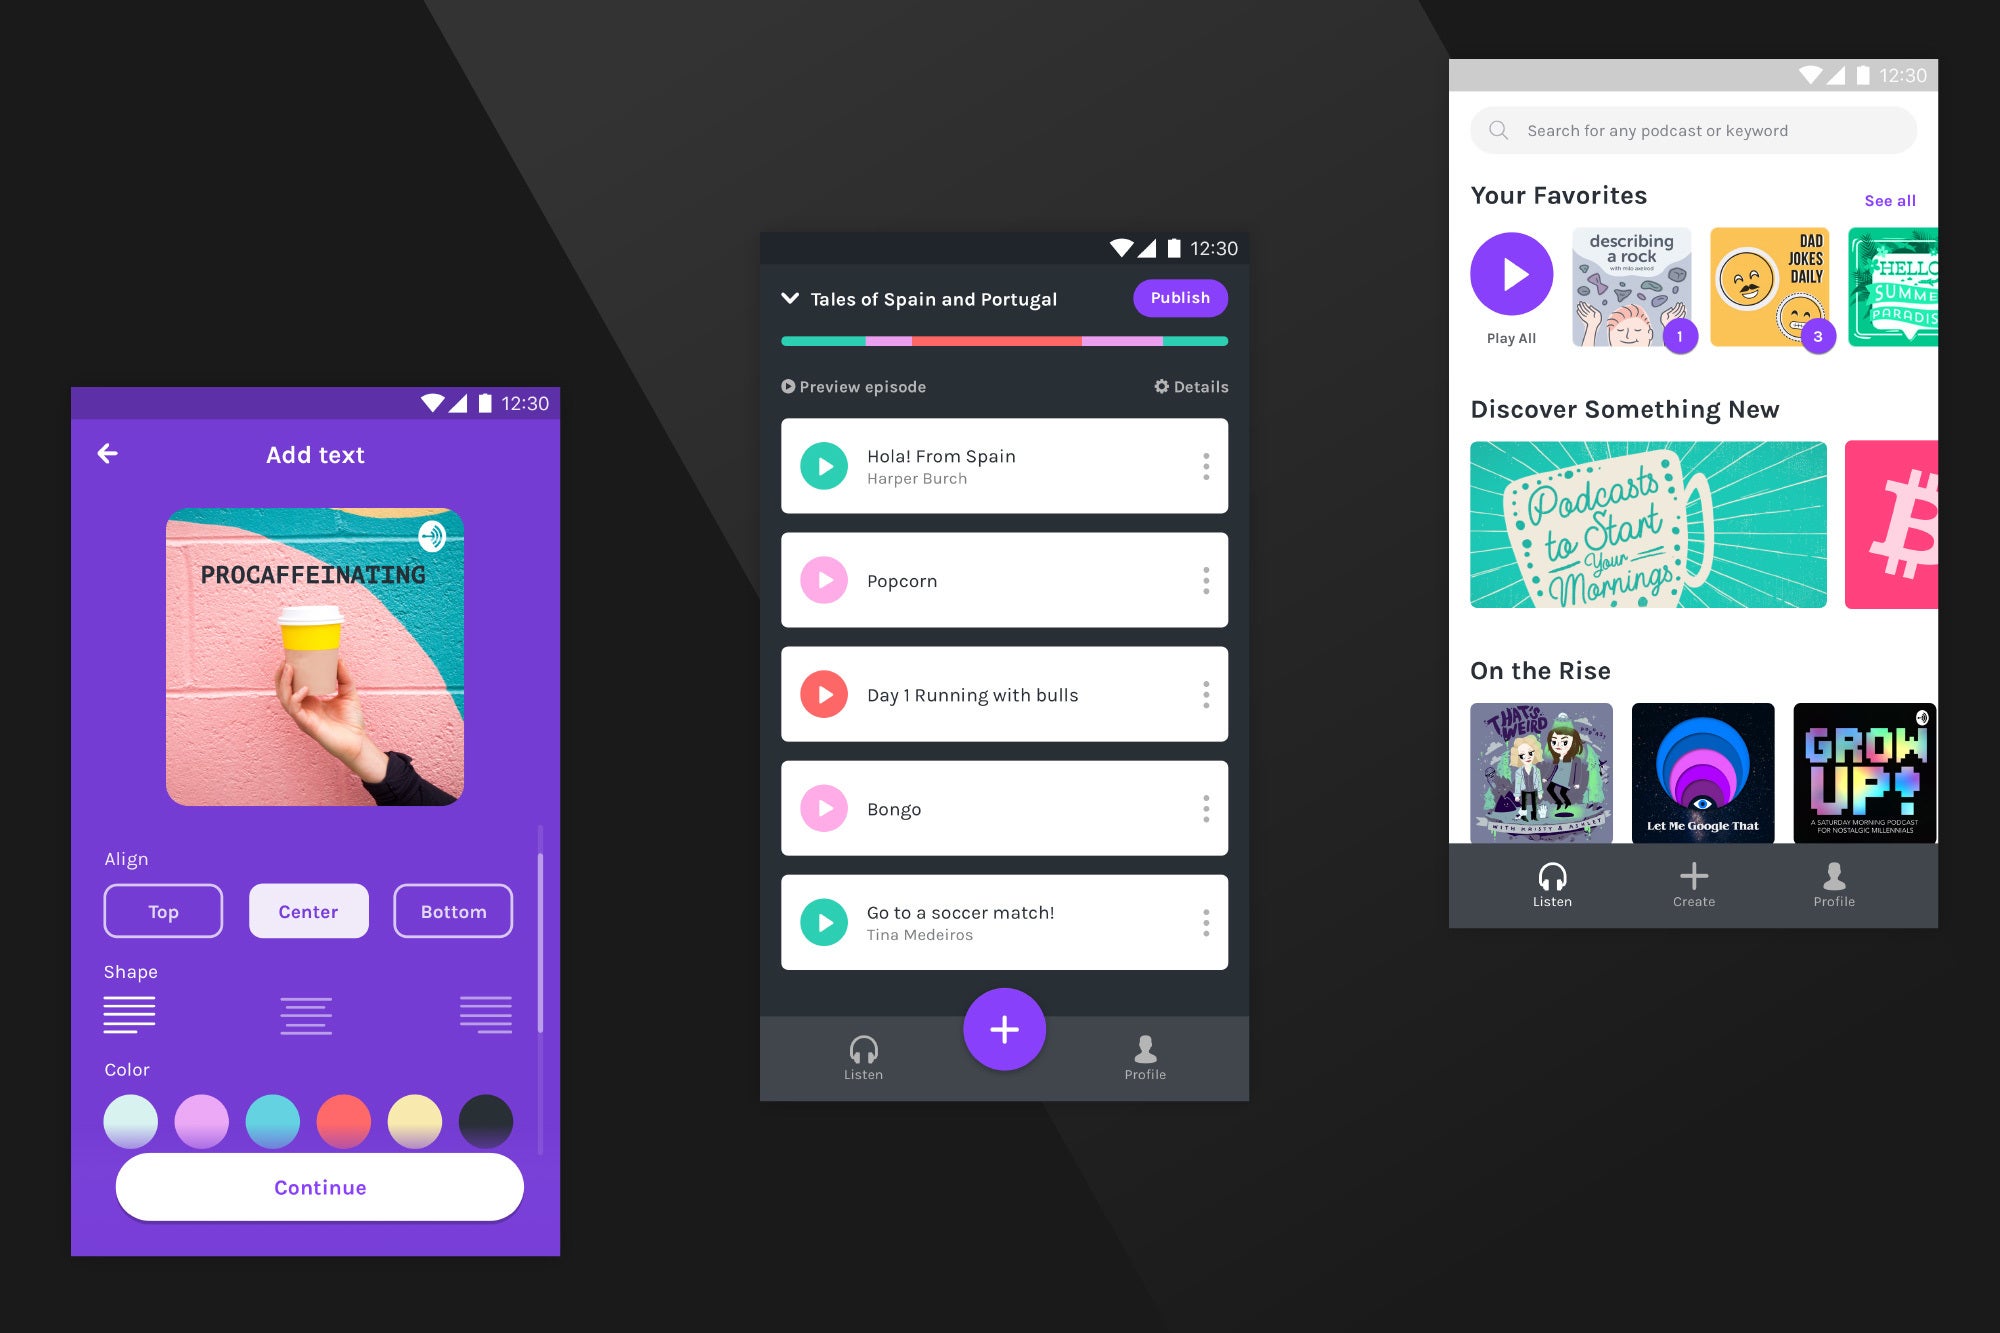 Anchor, 2018 Material Design Award winner for adaptation - Google names four apps as its 2018 Material Design Award winners